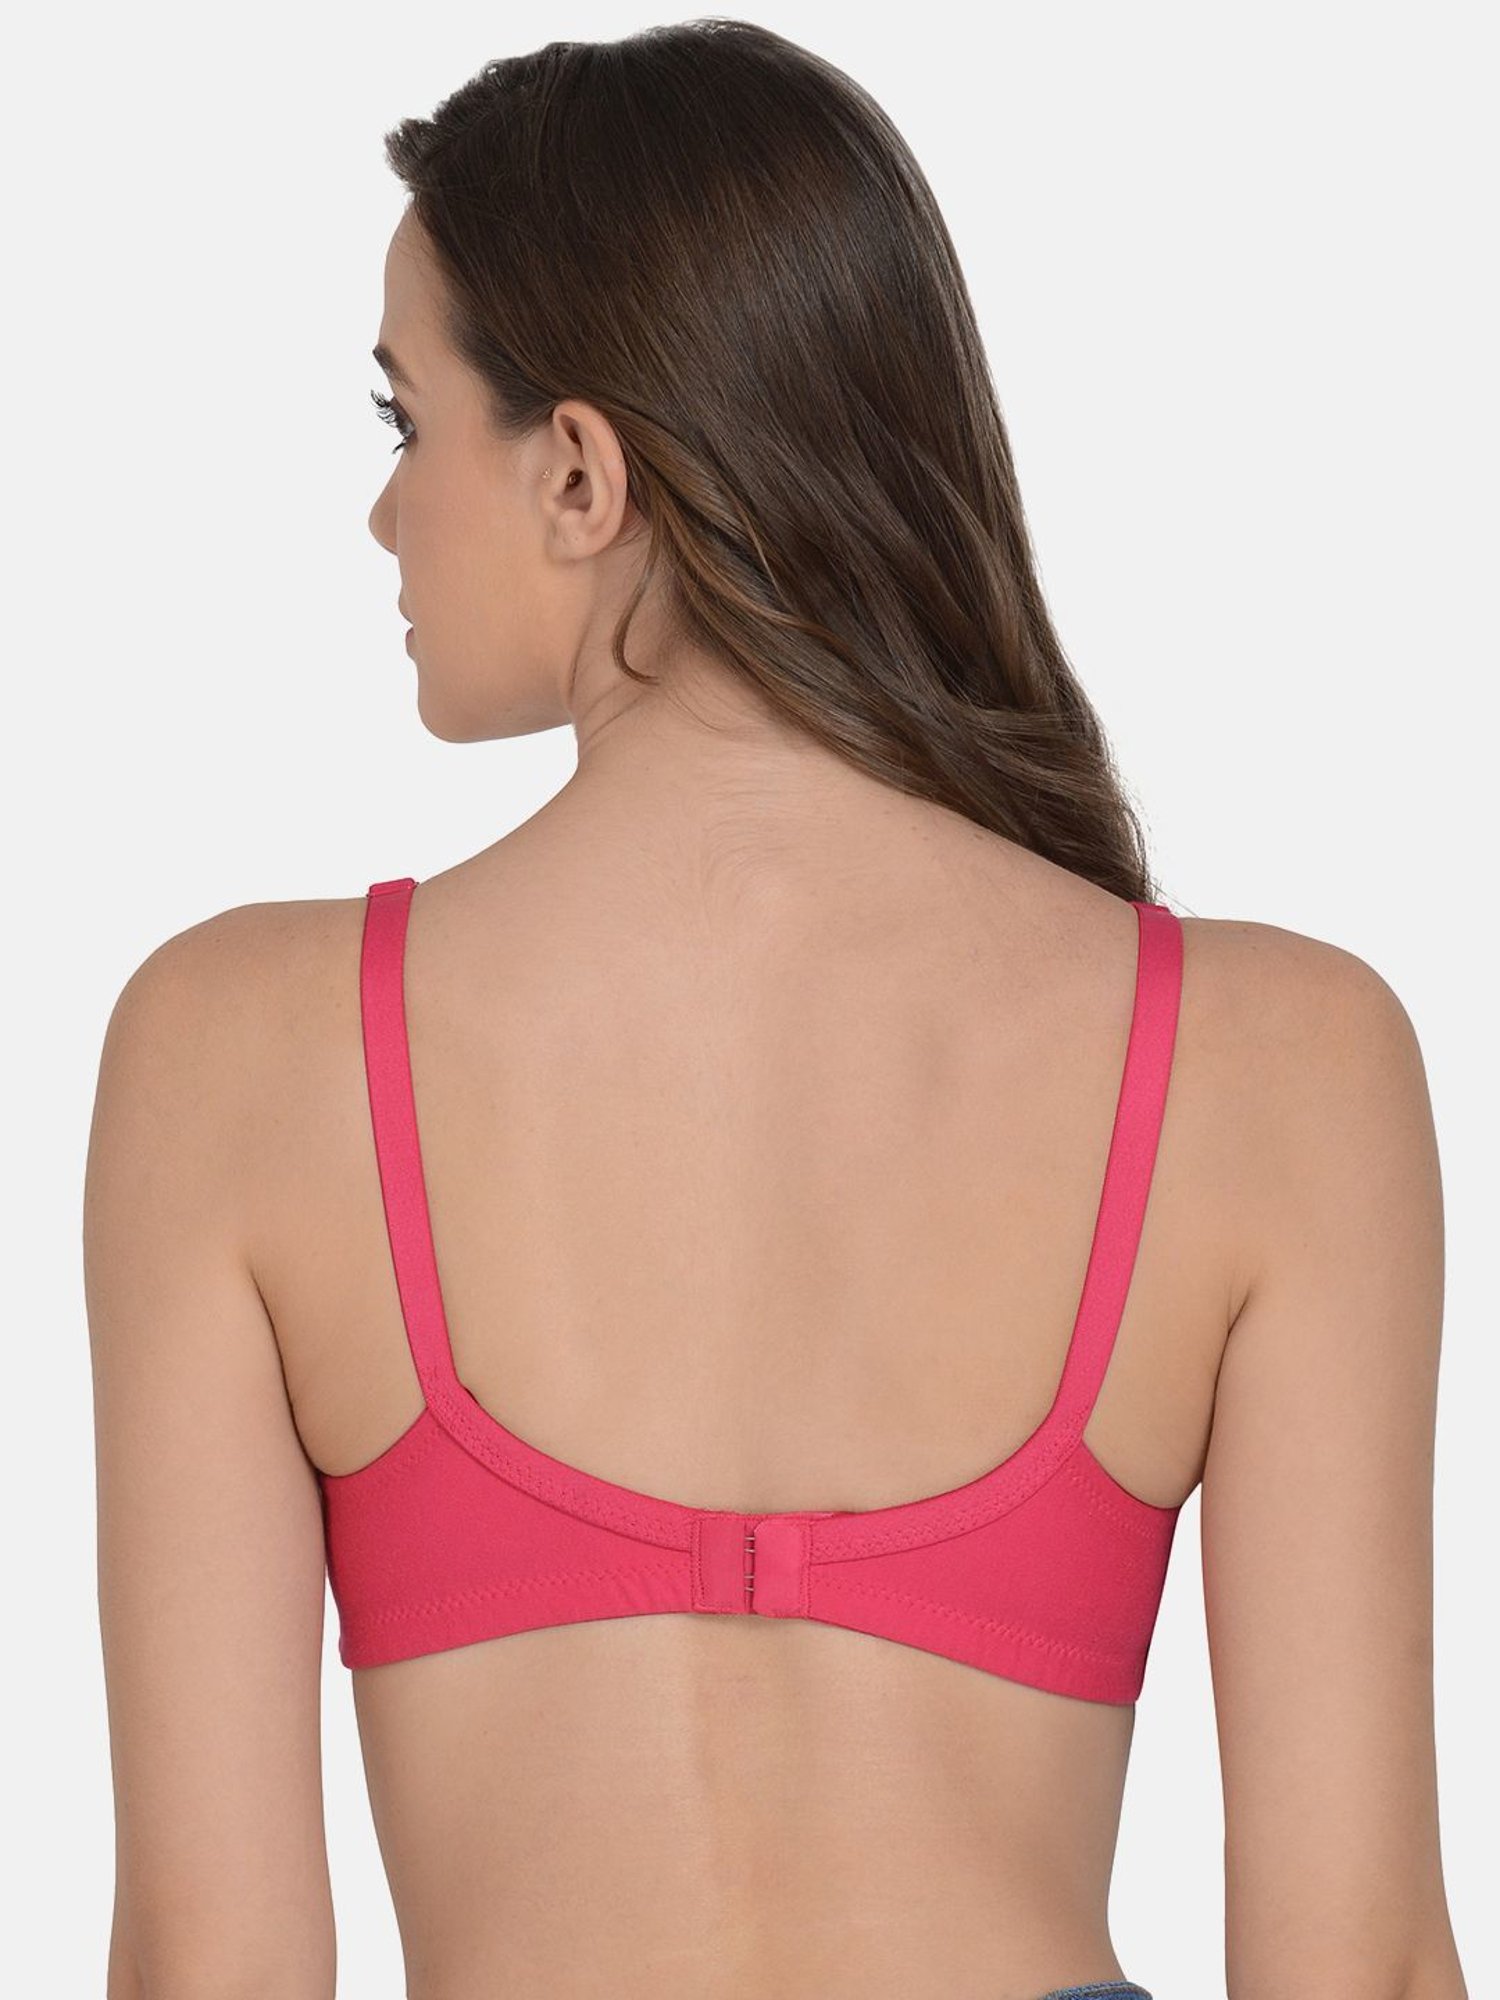 Shyle 38B Fluorescent Pink Push Up Bra in Mangalore - Dealers